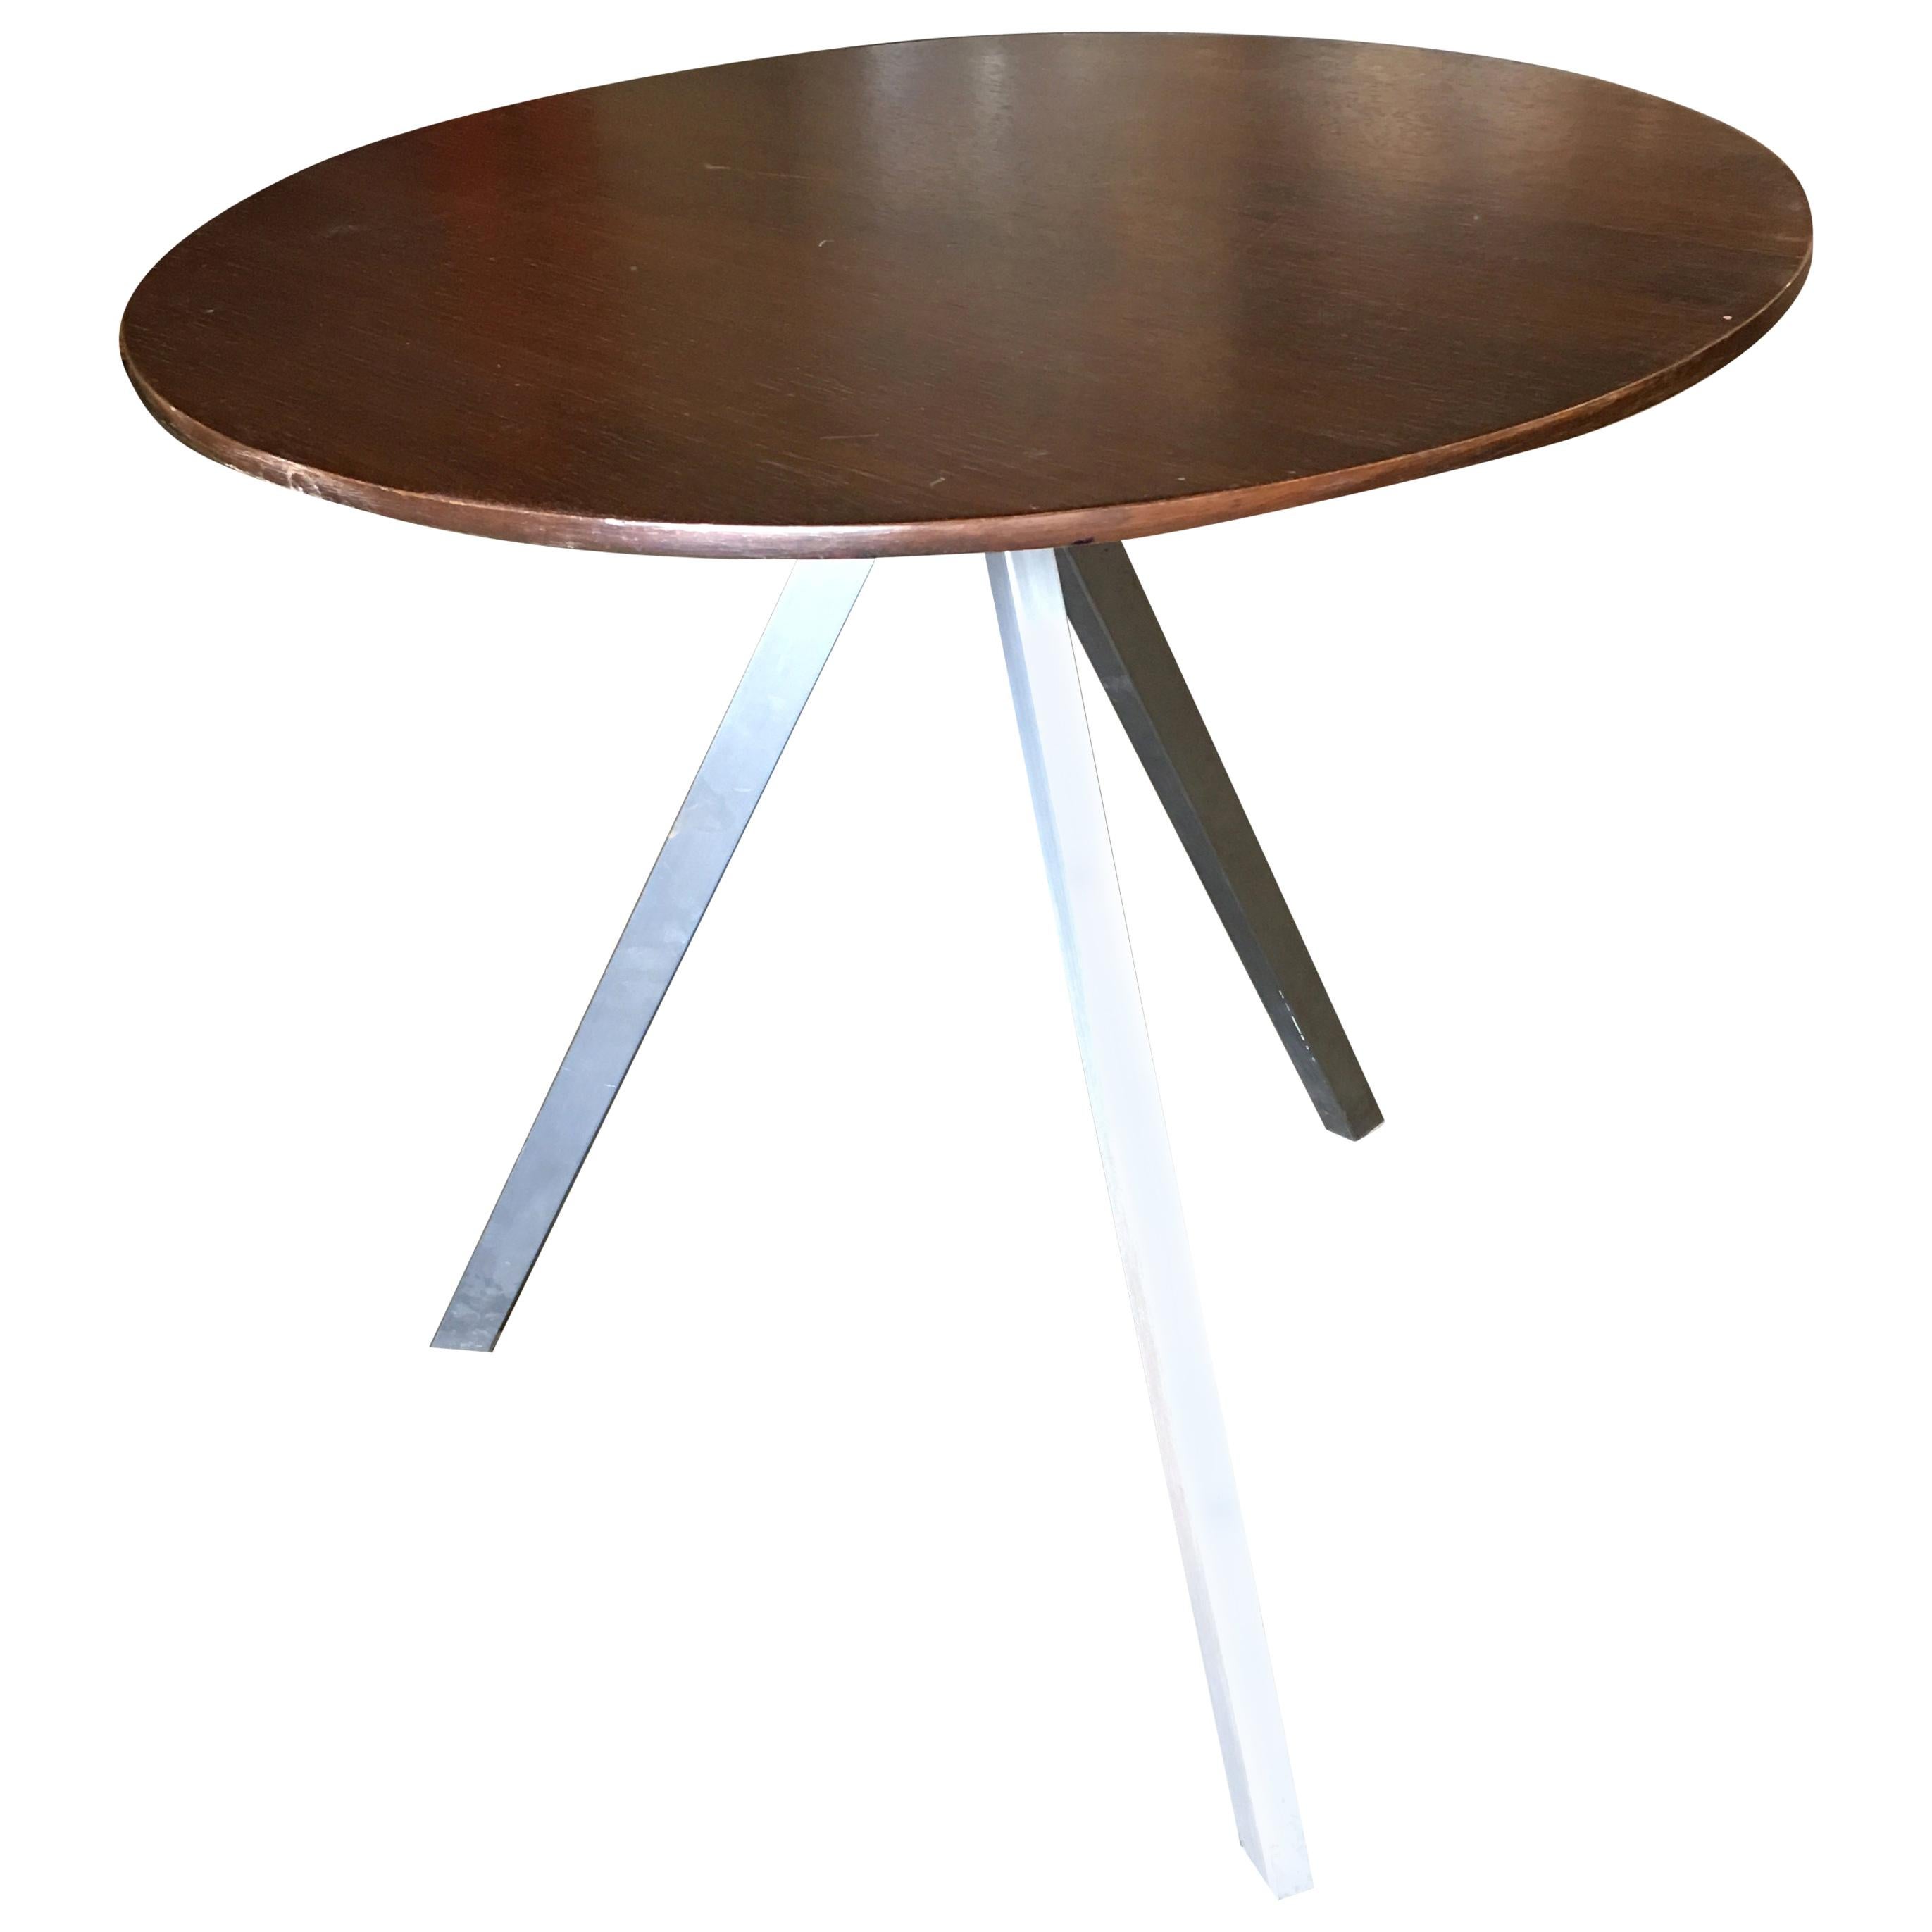 Small Tripod Leg Side Table with Round Knife Edge Top